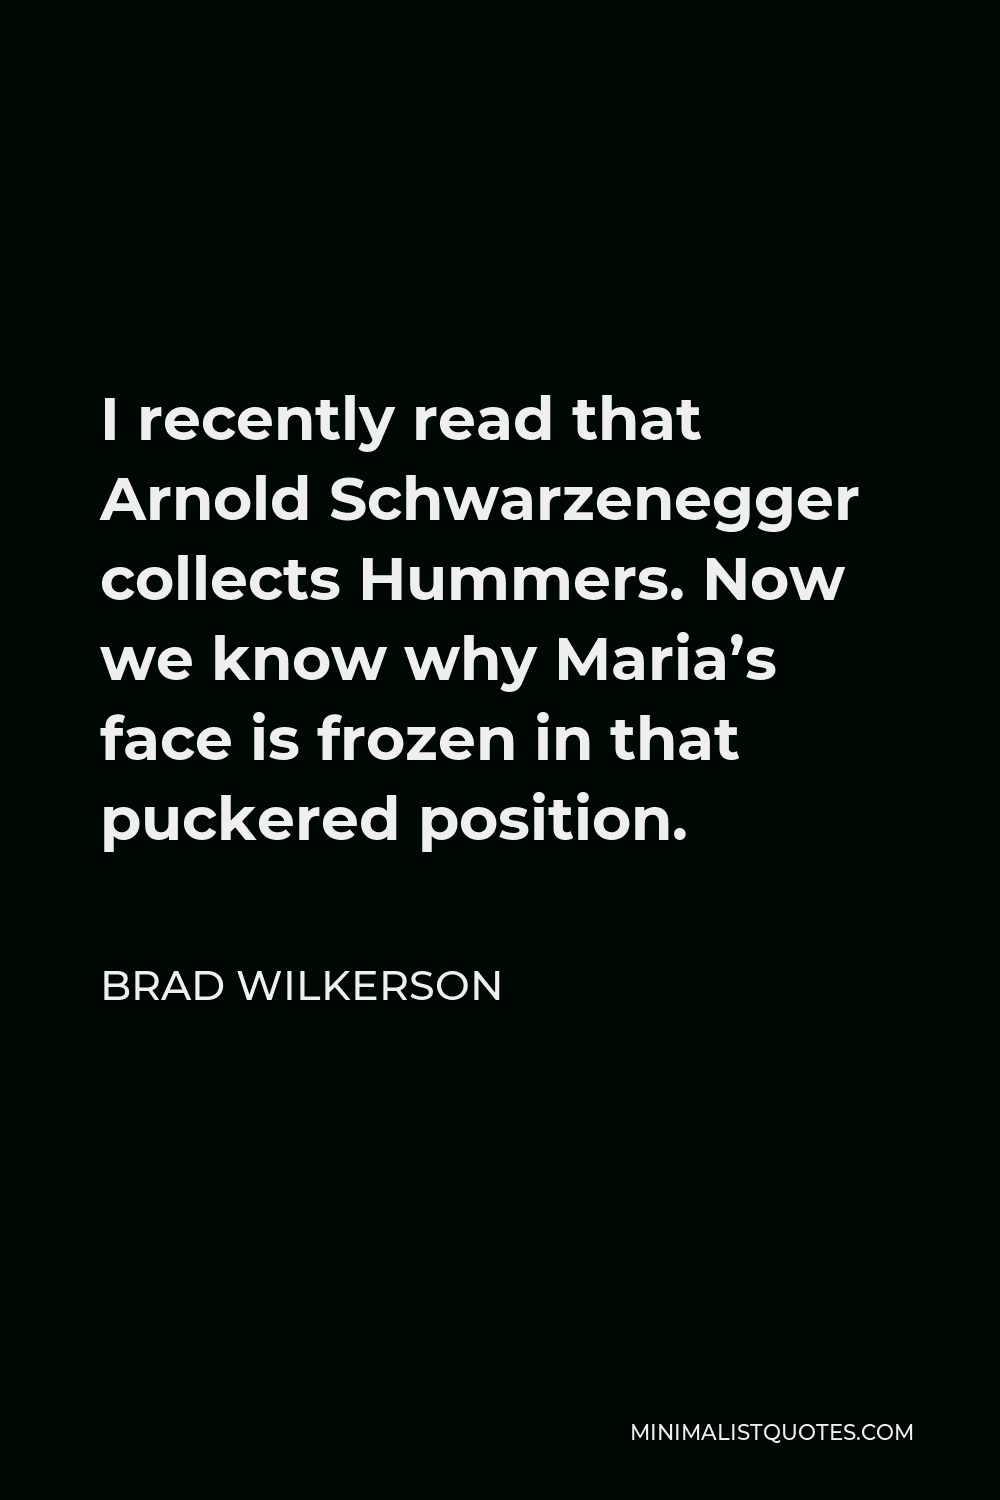 Brad Wilkerson Quote - I recently read that Arnold Schwarzenegger collects Hummers. Now we know why Maria’s face is frozen in that puckered position.